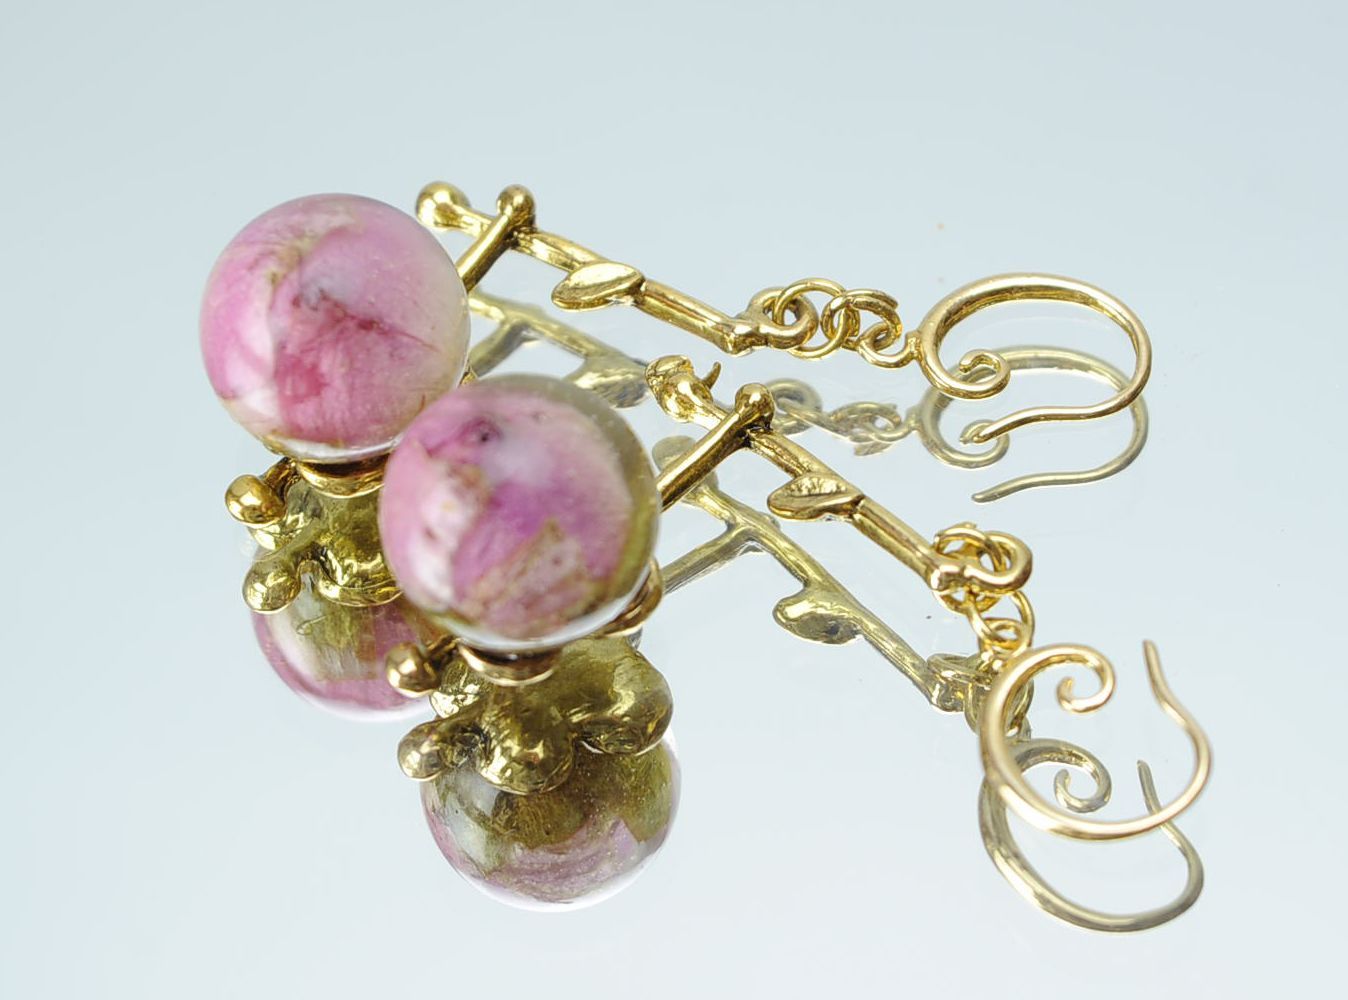 Golden earrings made from buds of the roses photo 1